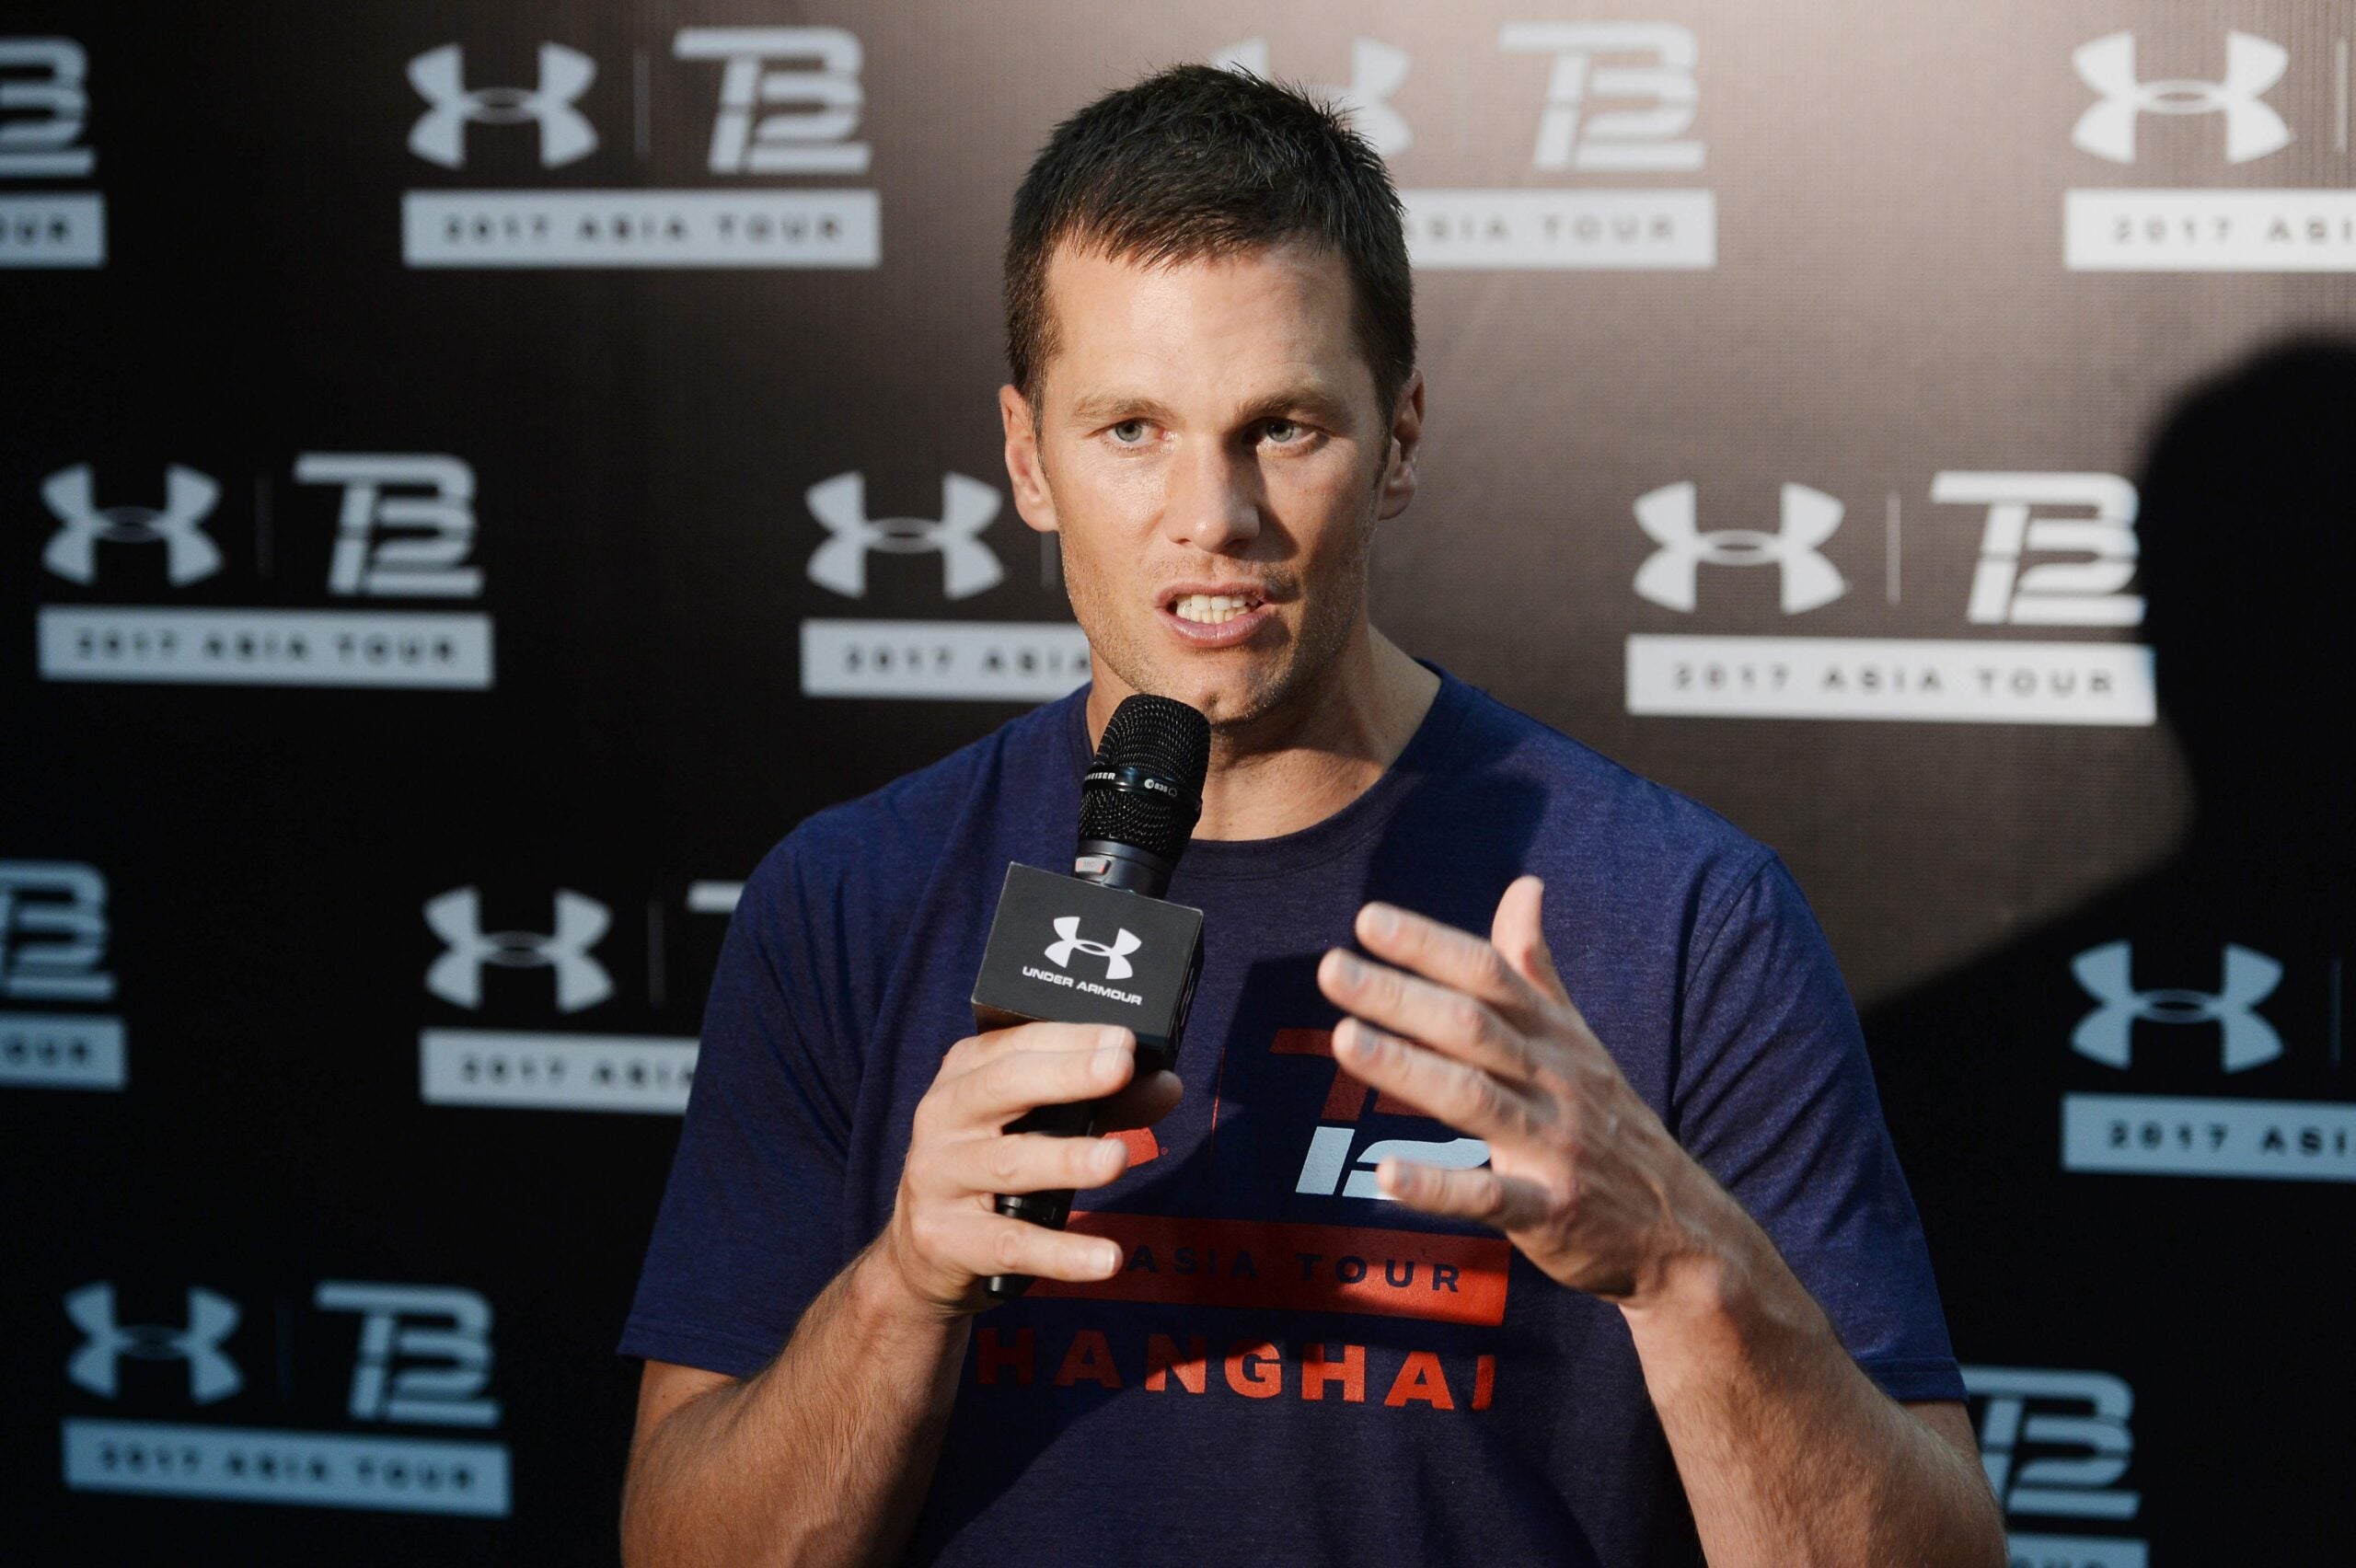 Tom Brady is writing a book called 'The TB12 Method'